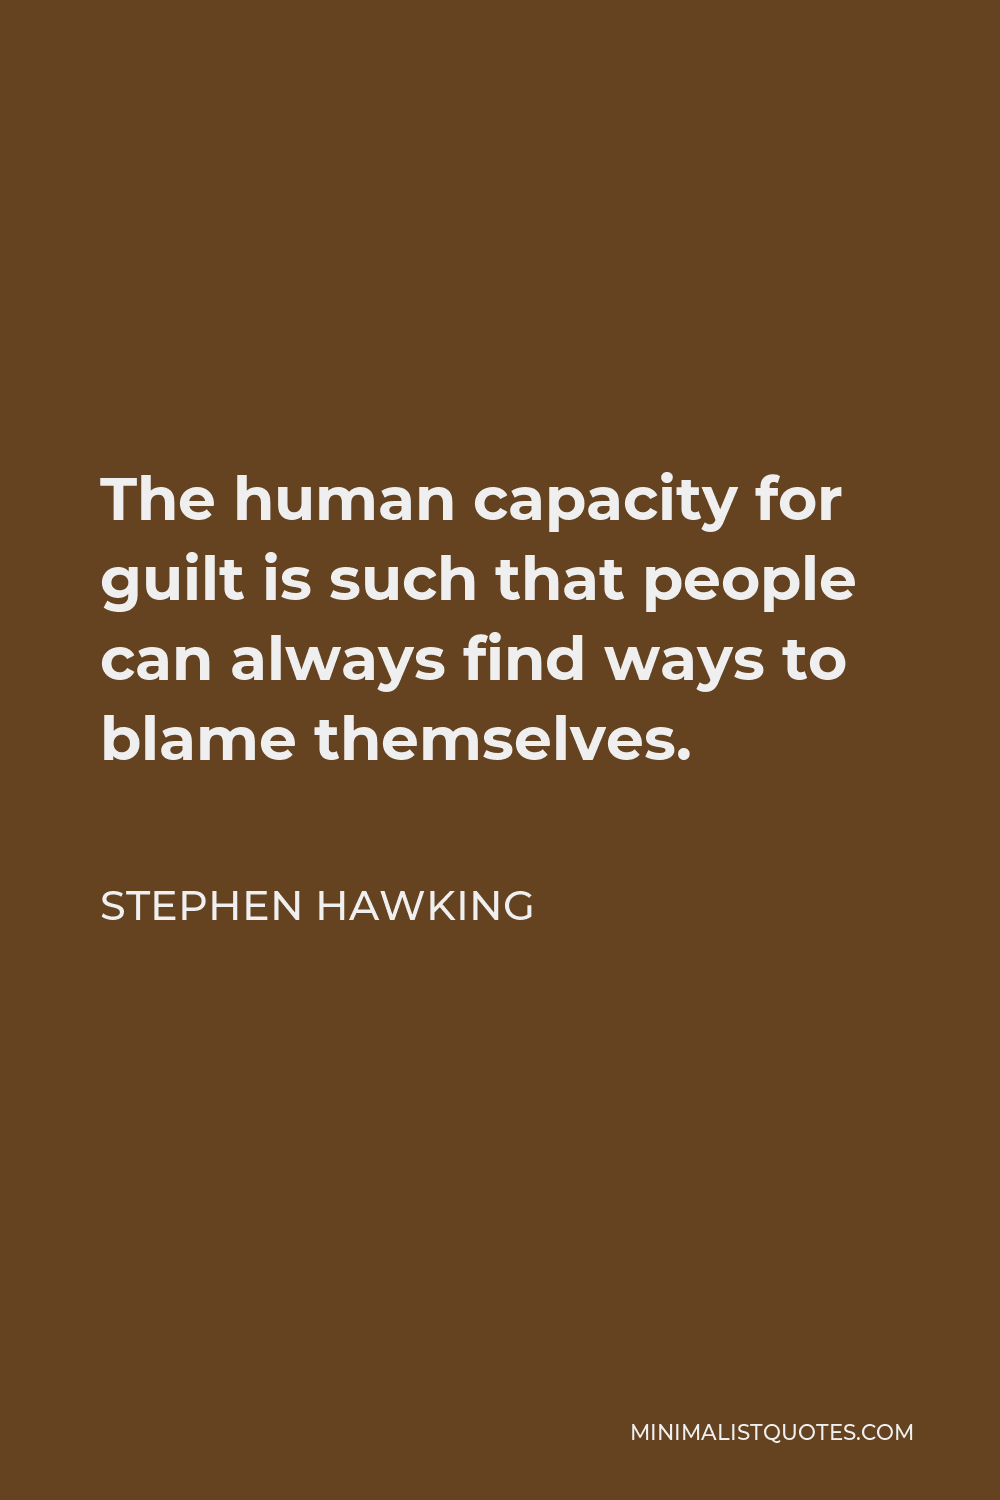 Stephen Hawking Quote - The human capacity for guilt is such that people can always find ways to blame themselves.